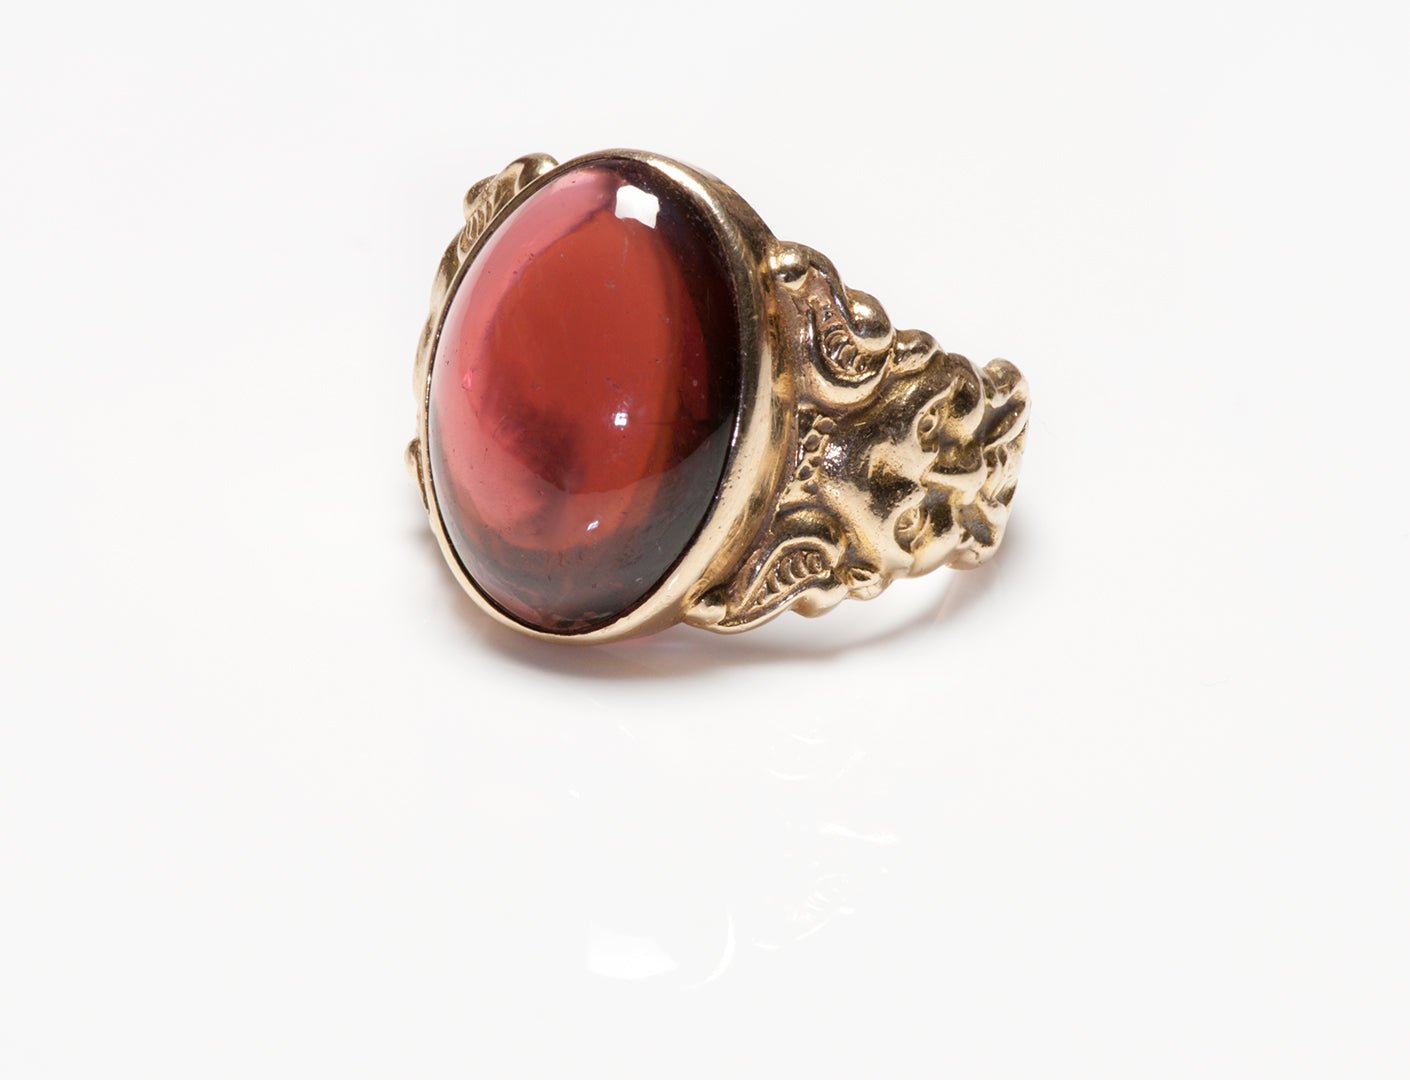 Antique Turn of the Century Gold and Cabochon Garnet Men's Ring